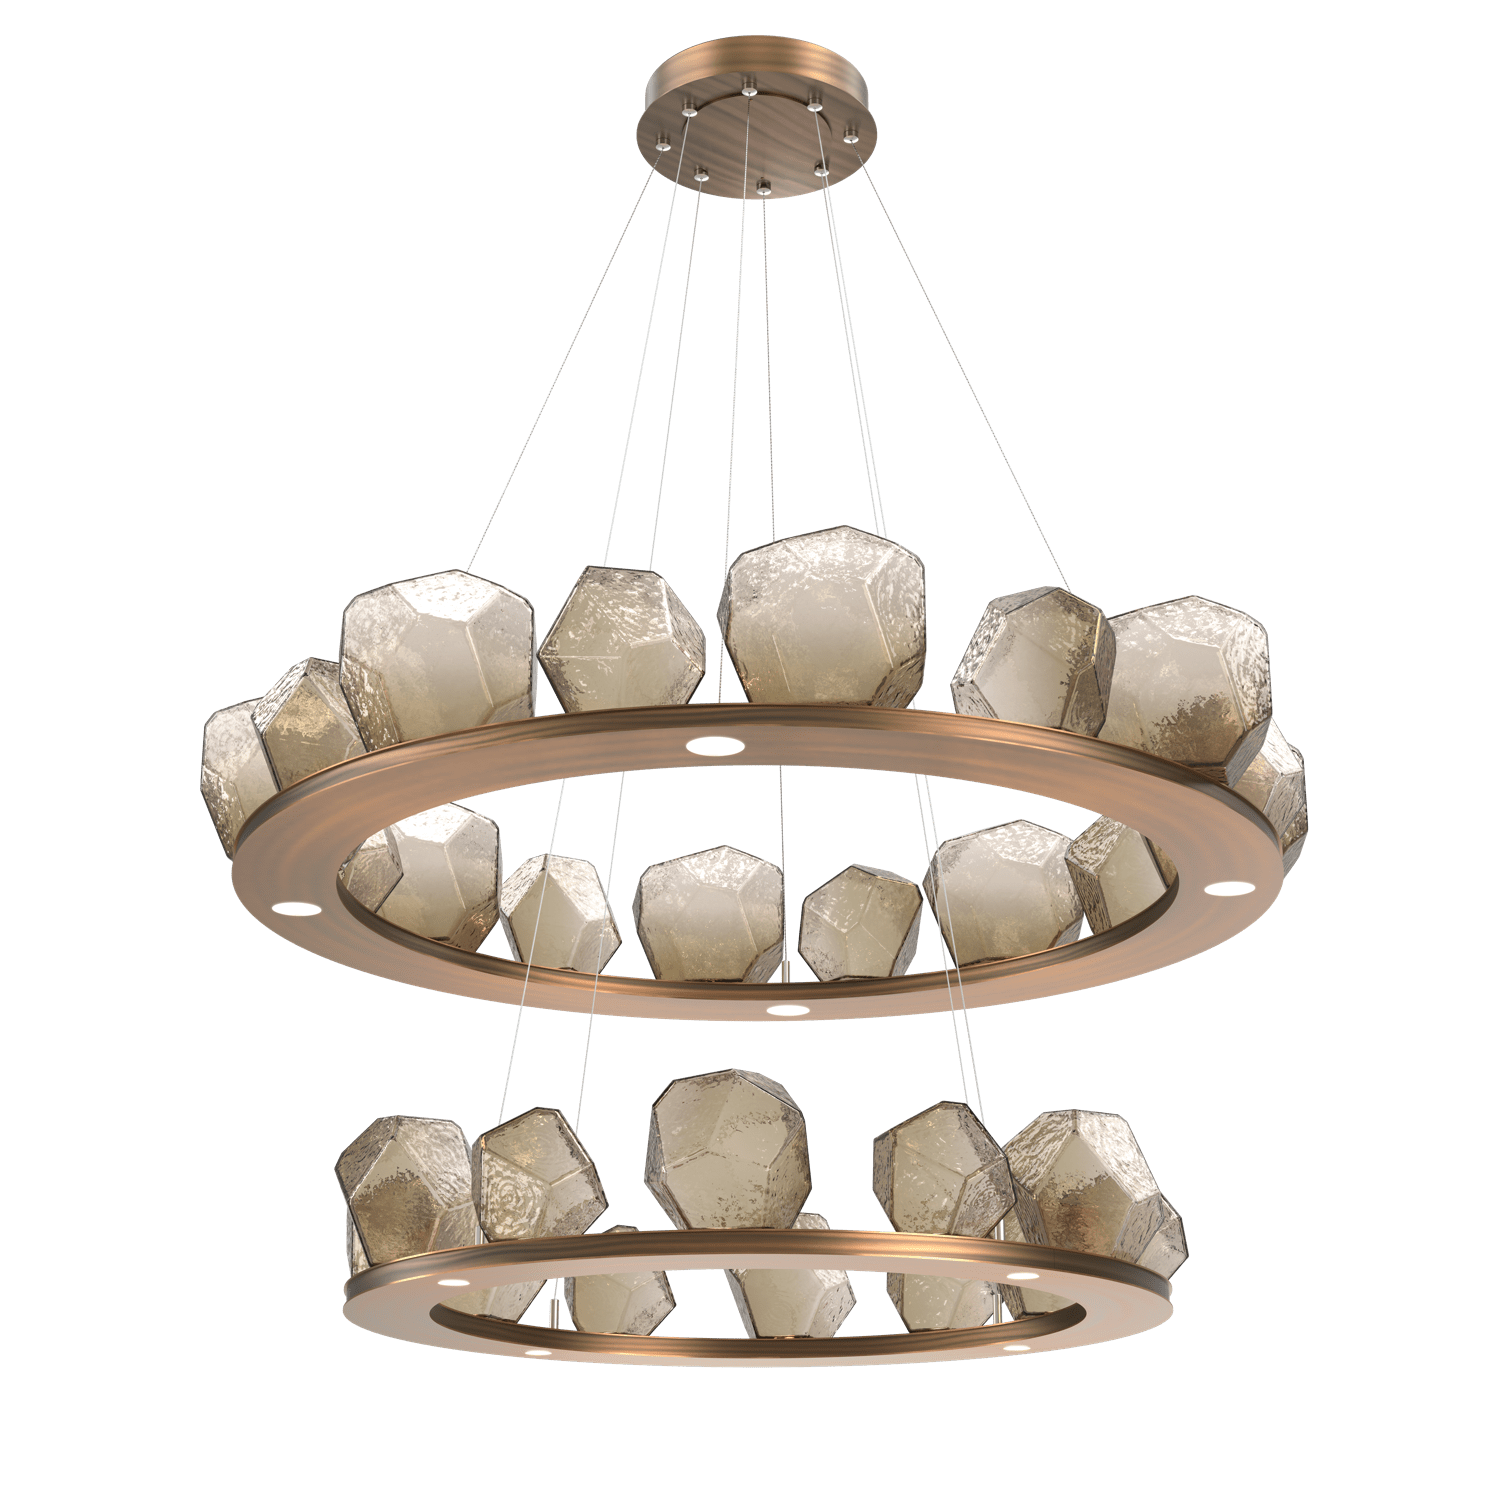 CHB0039-2B-RB-B-Hammerton-Studio-Gem-48-inch-two-tier-ring-chandelier-with-oil-rubbed-bronze-finish-and-bronze-blown-glass-shades-and-LED-lamping